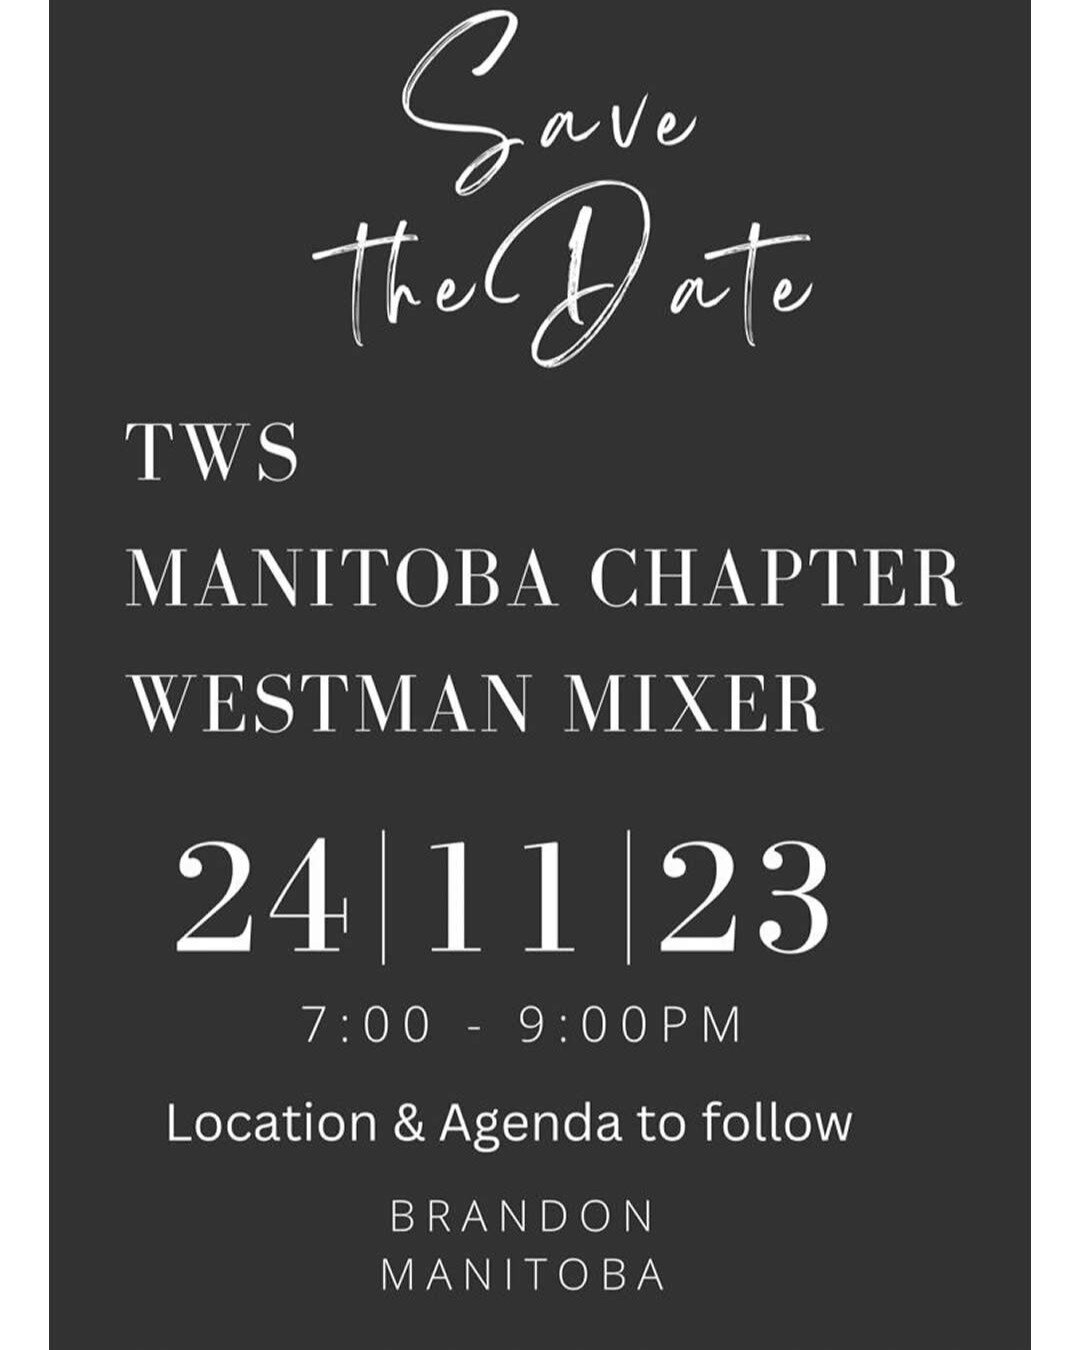 #Mix&amp;Mingle
SAVE THE DATE !
More details &amp; location information coming soon.

Pre-Register will be requested 
(helps with the catering!)

Pre-Register here = https://tinyurl.com/dxsx72nu
OR visit the Events Page on the TWS Manitoba website (w